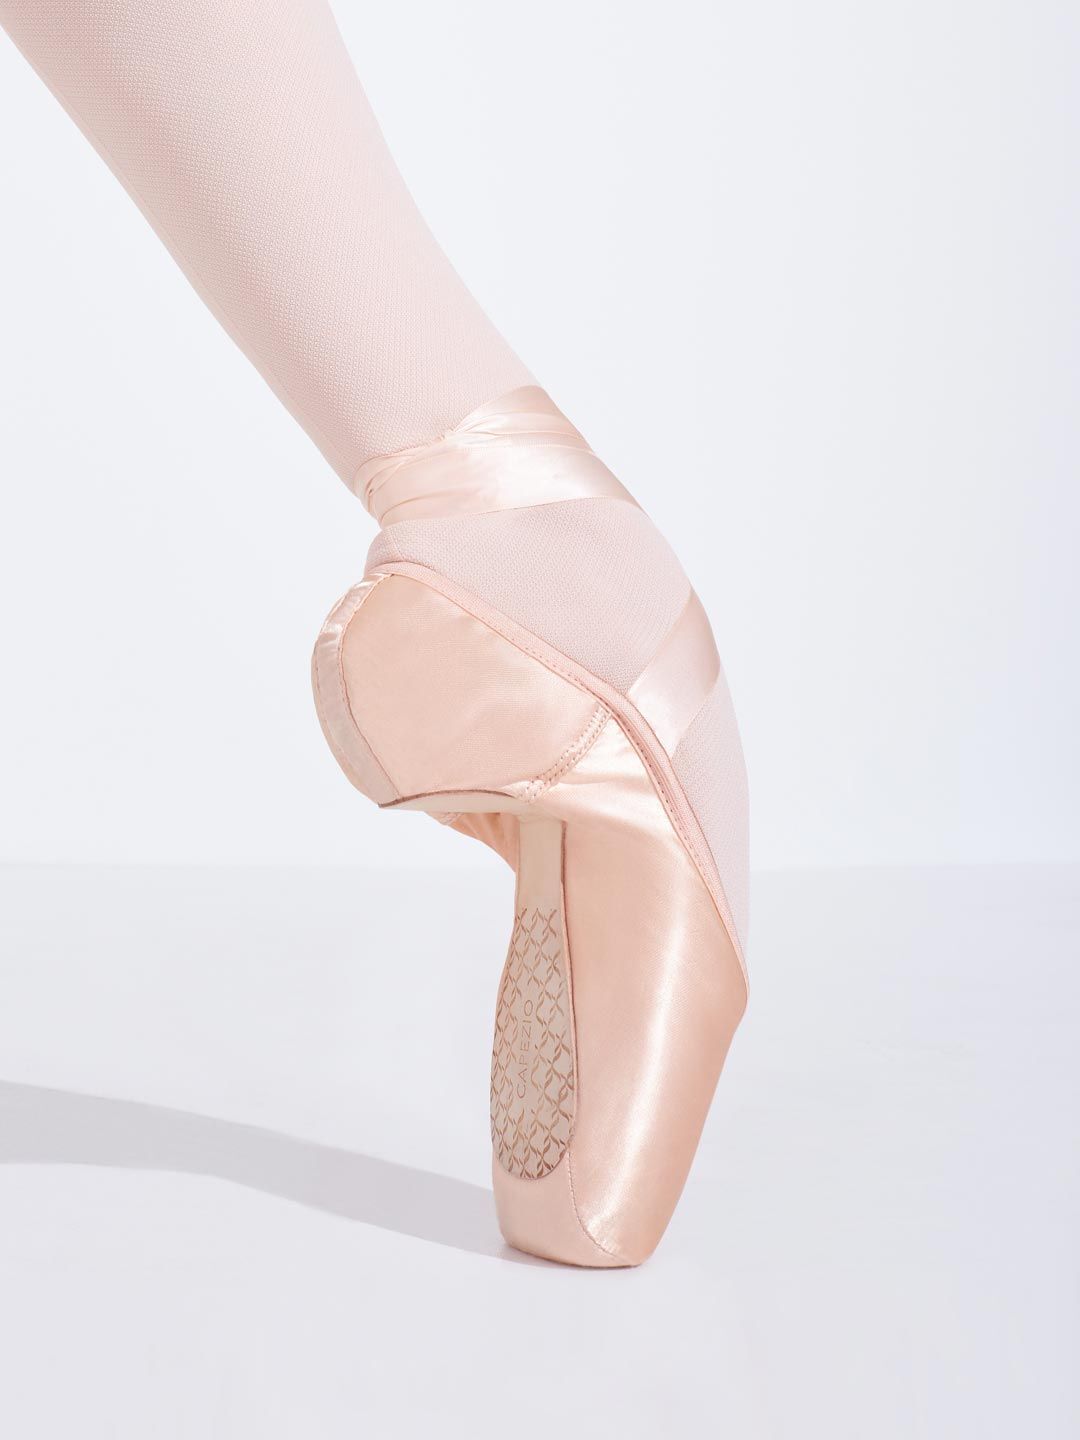 Cambré - 1126W Pointe Shoe with #3 Shank and Broad Toe Box